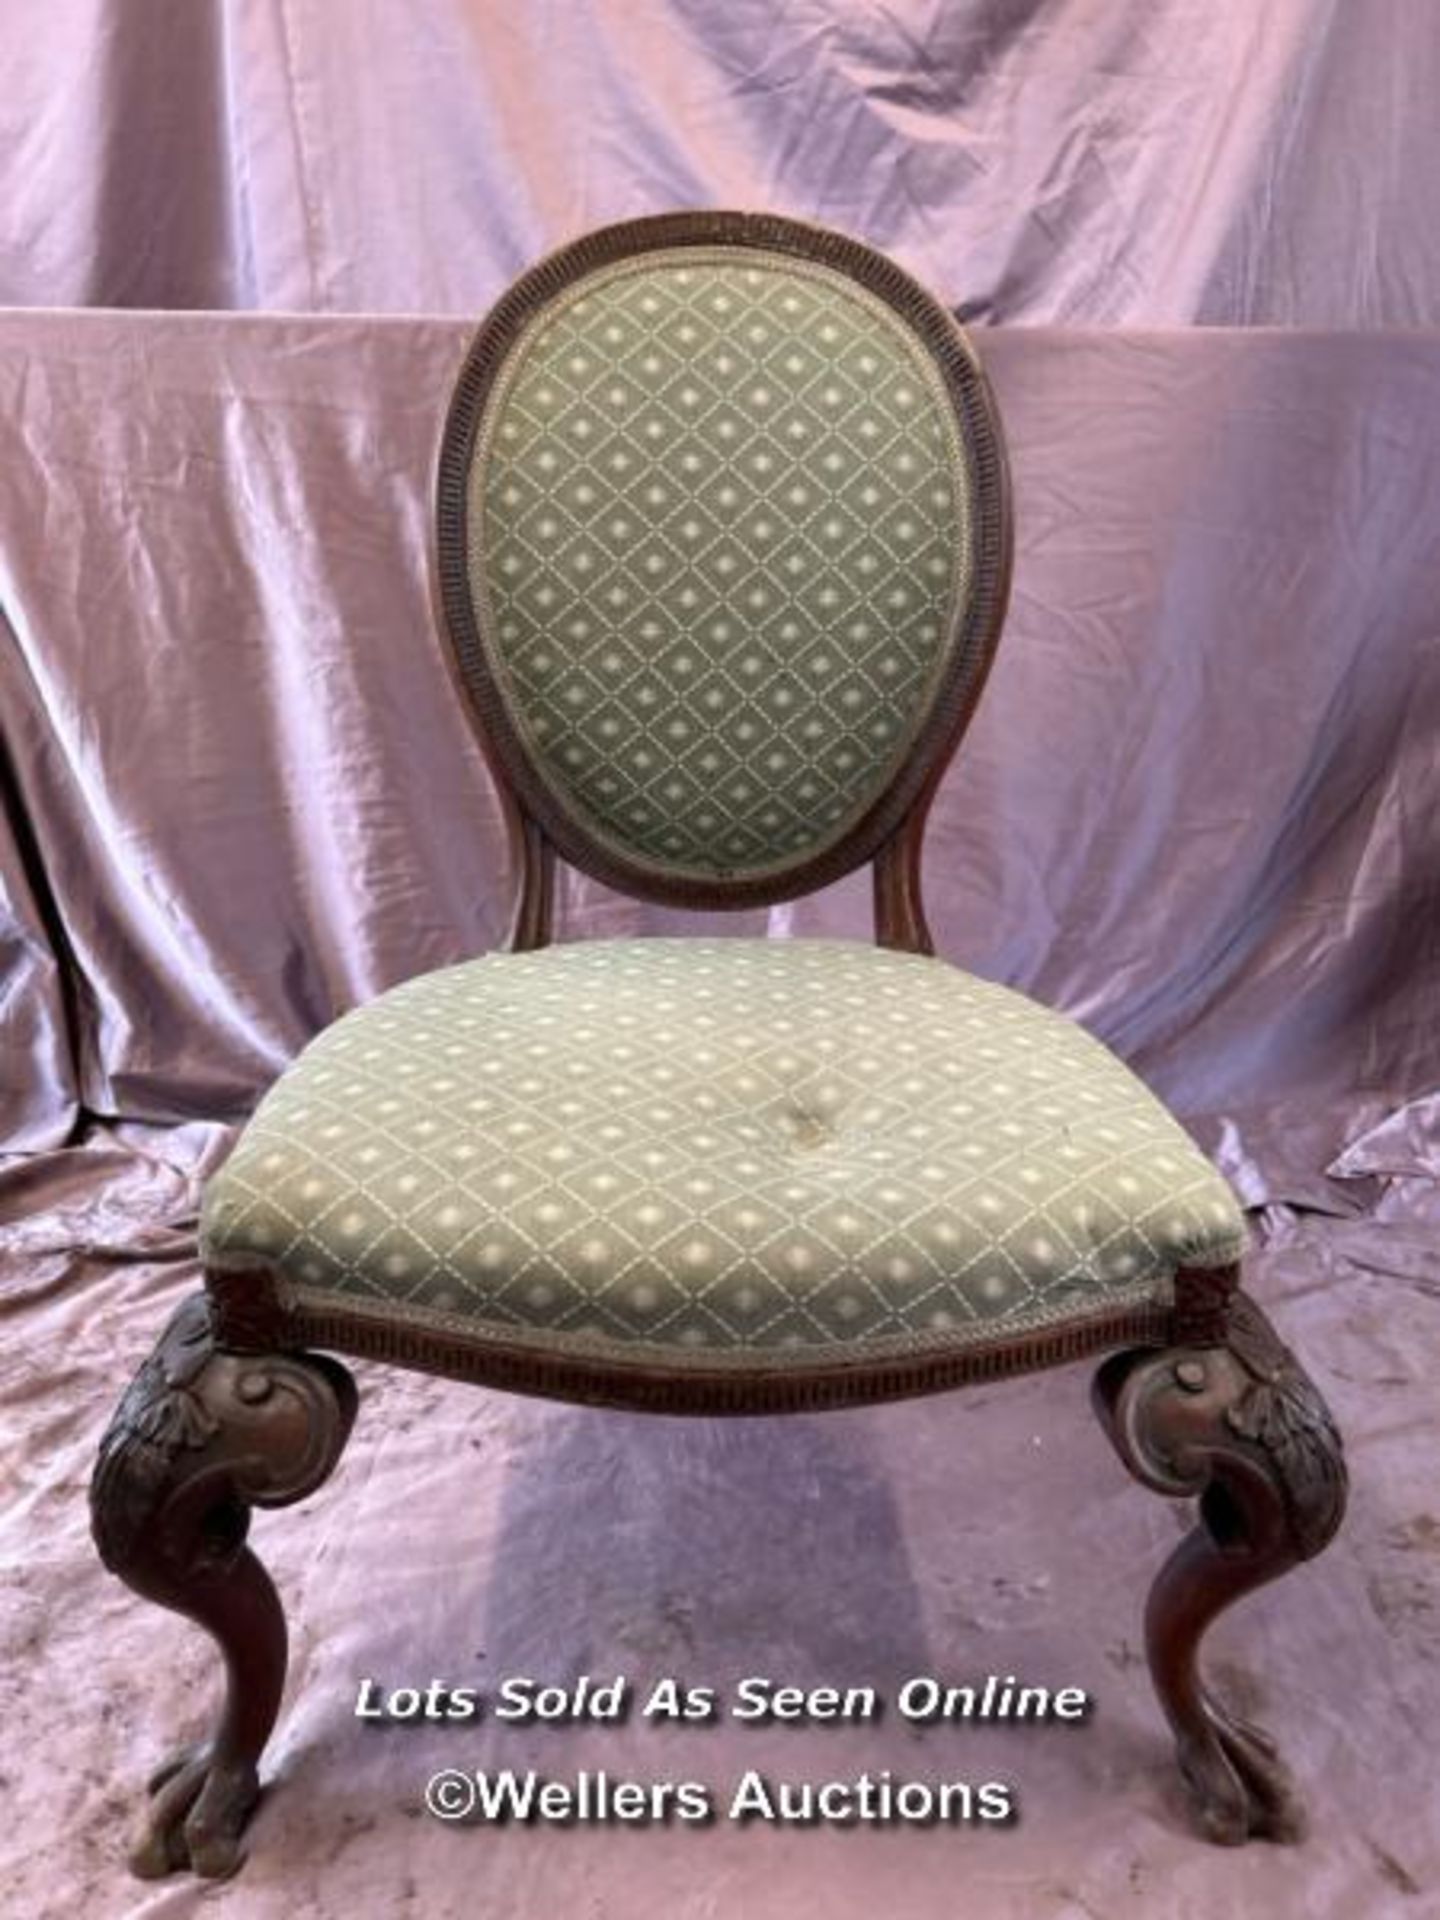 19TH CENTURY FEDERAL STYLE UPHOLSTERED SINGLE CHAIR WITH CARVED FRONT LEGS AND TWO CLAW FEET, HEIGHT